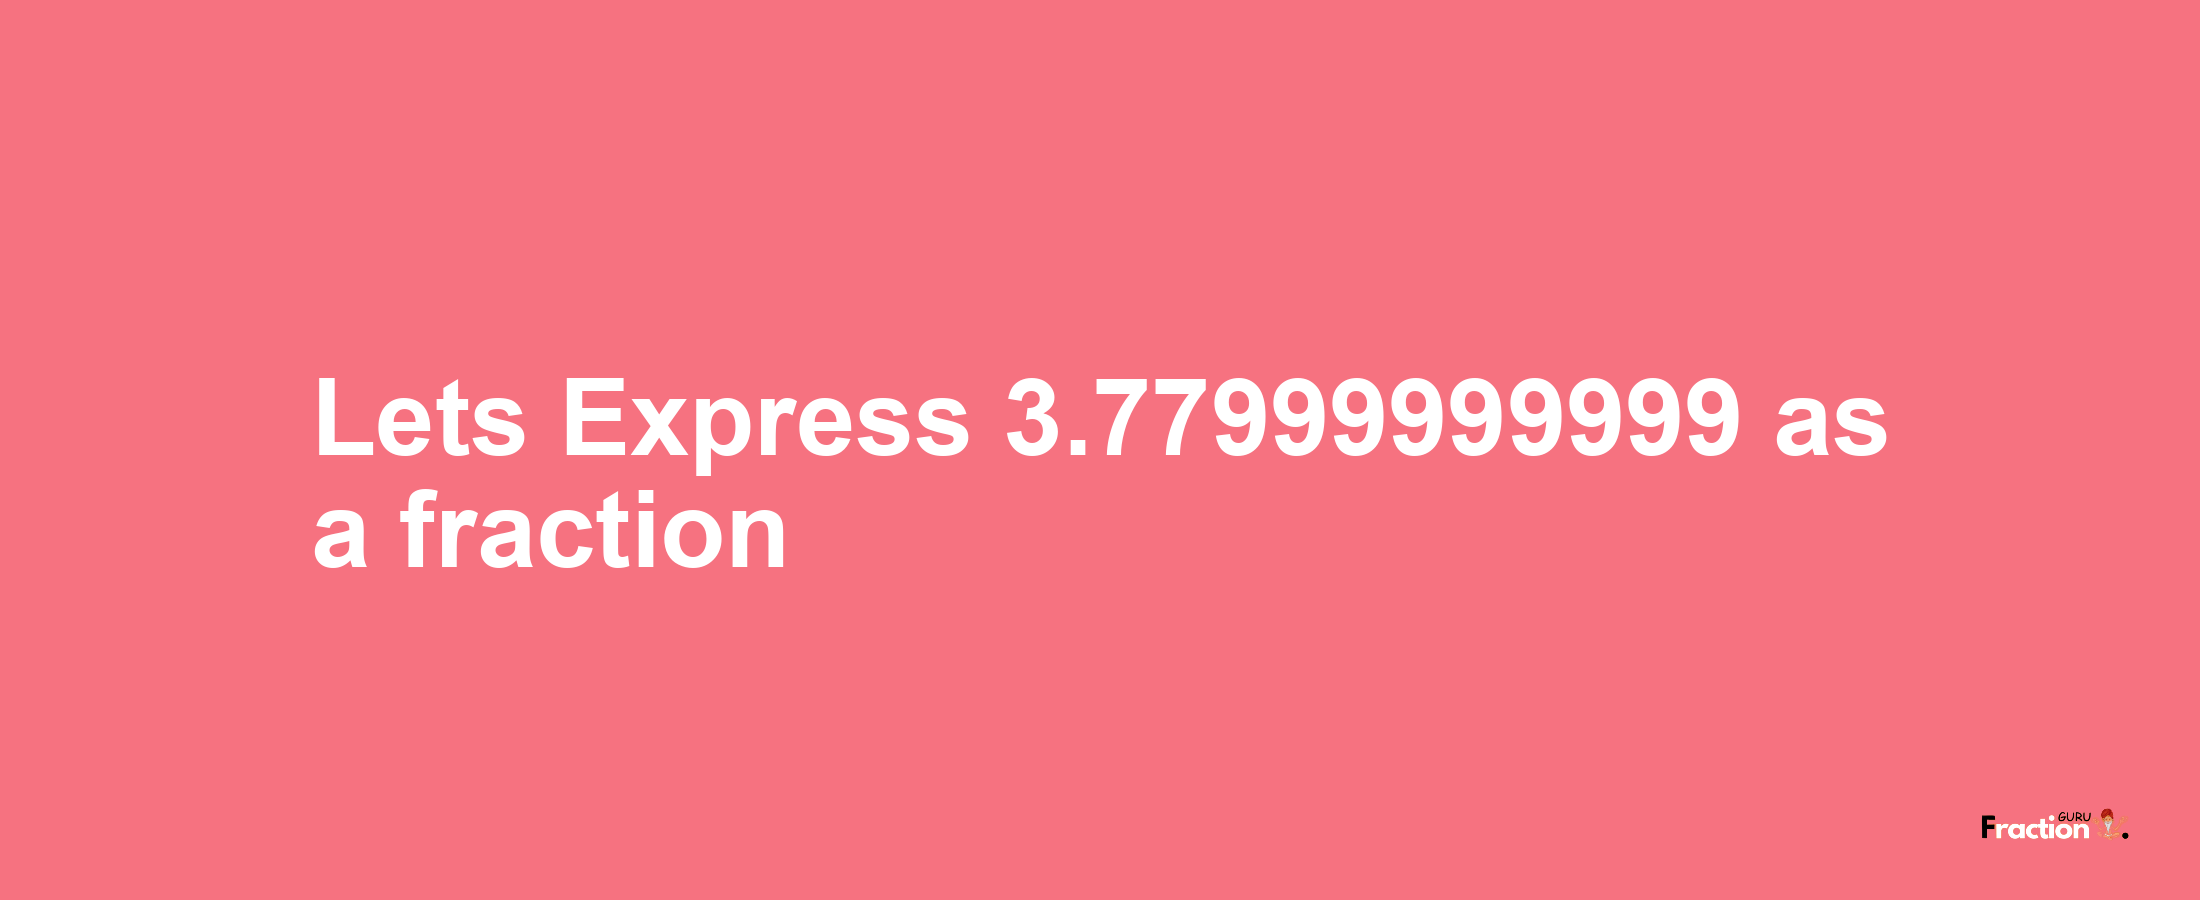 Lets Express 3.77999999999 as afraction